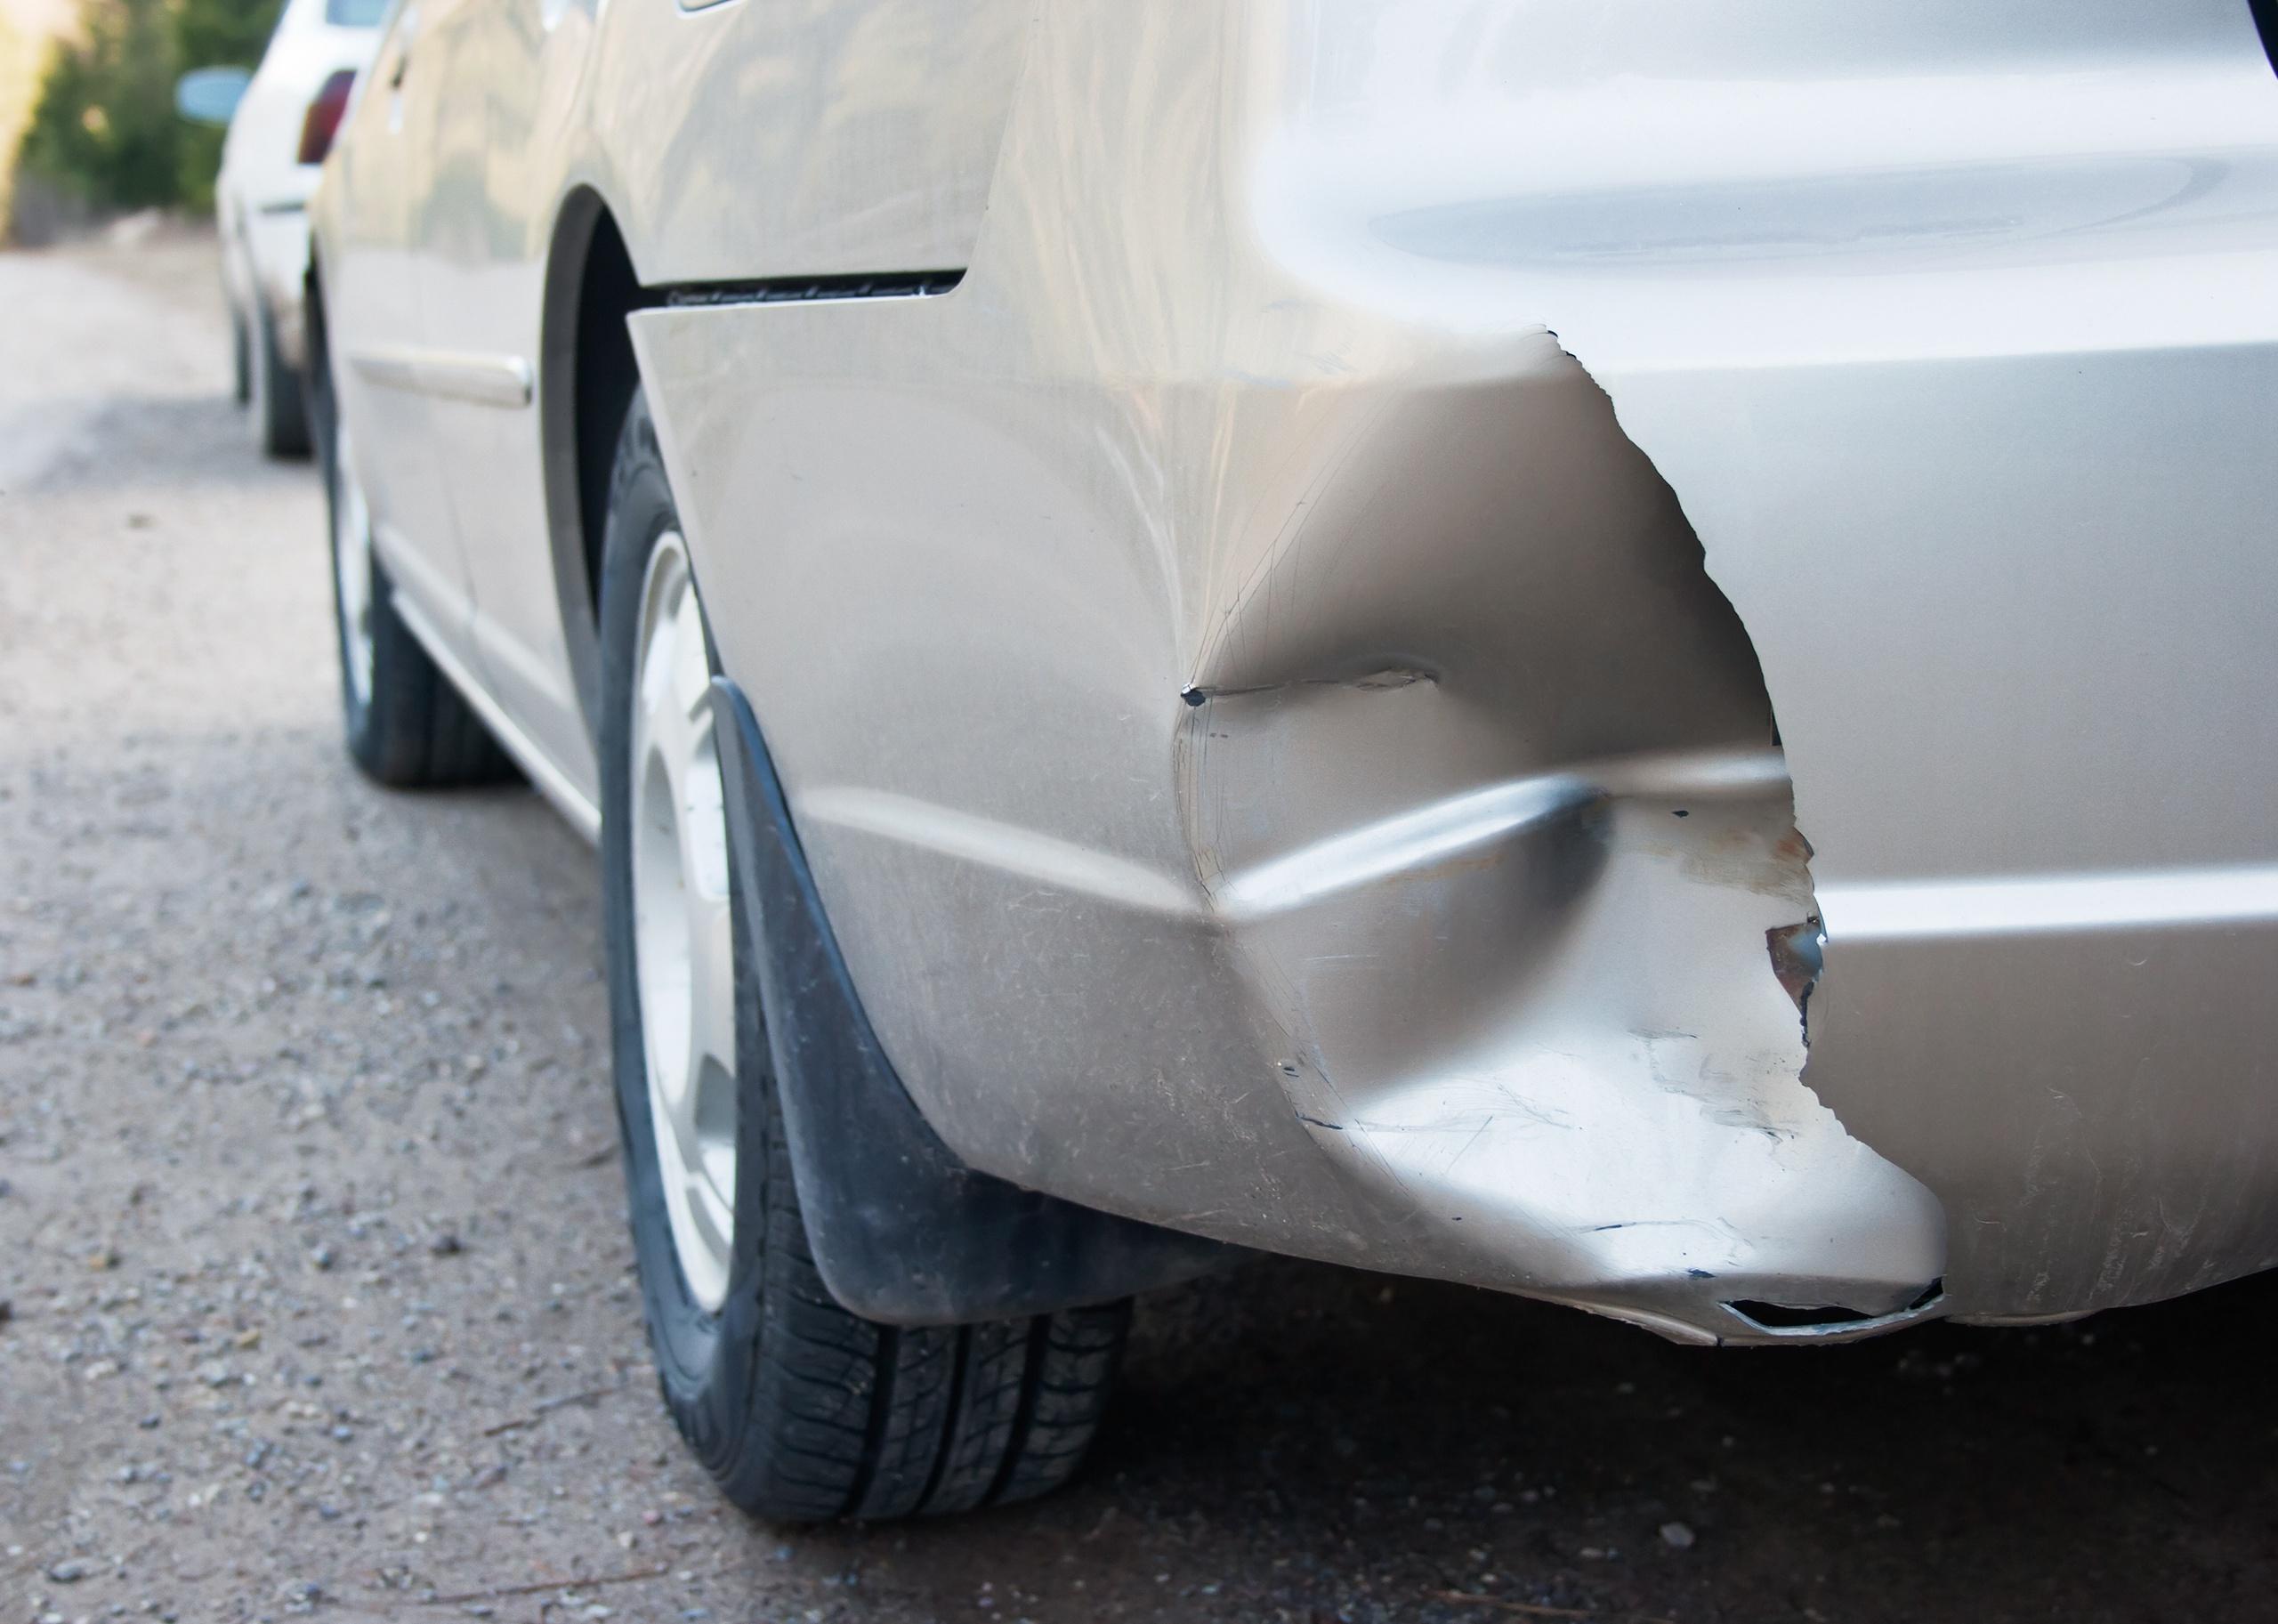 A car with a dented rear bumper in an accident